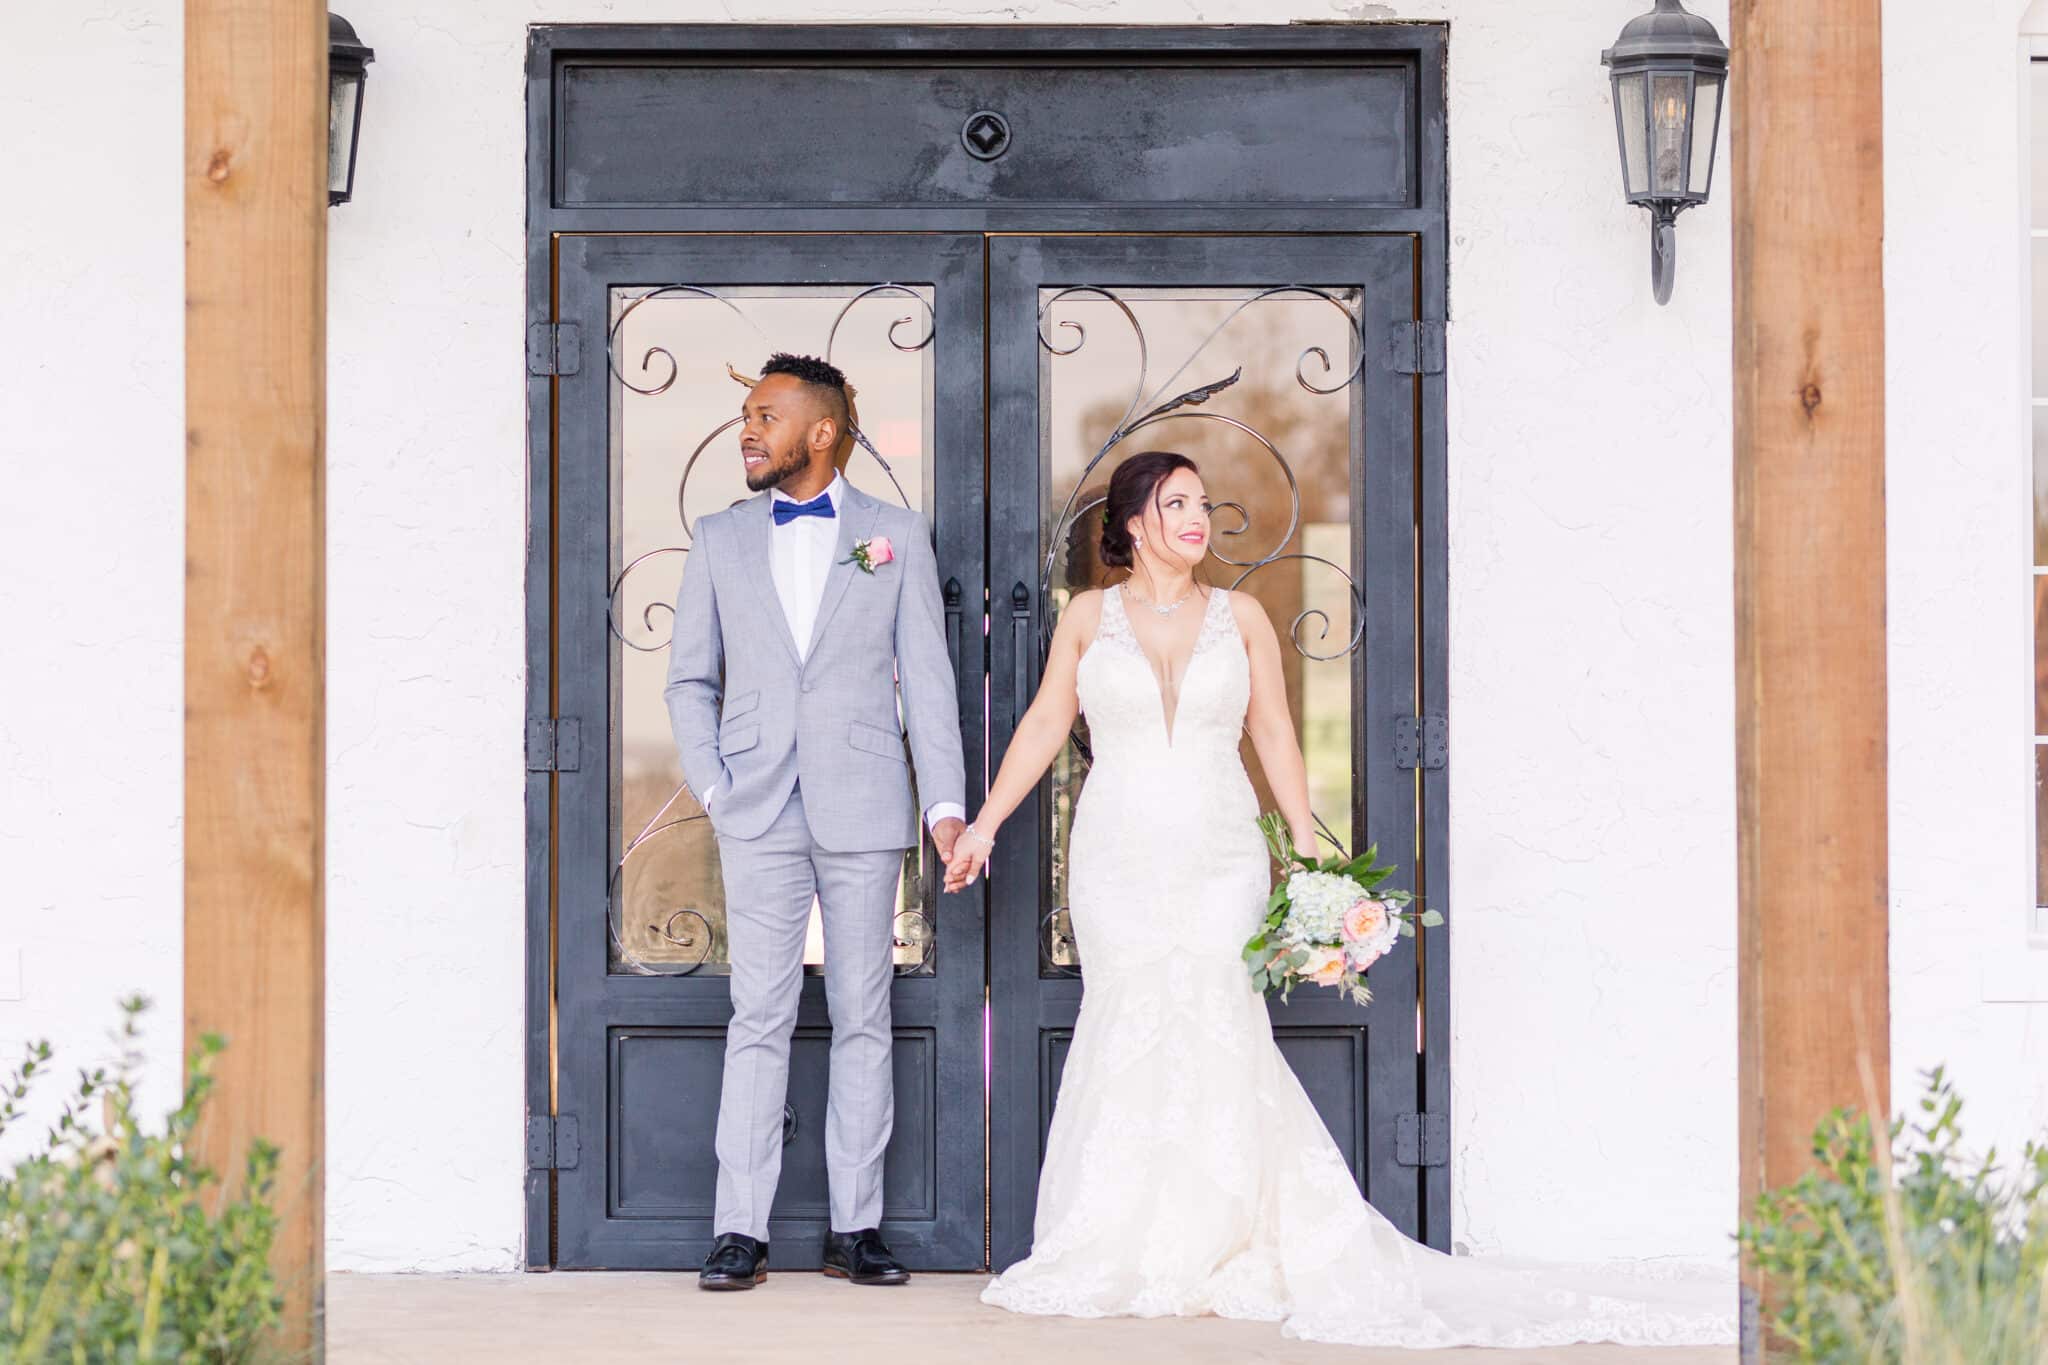 couple stand in front of black doors of wedding venue holding hands and looking off to the side away from each other in suit and wedding dress